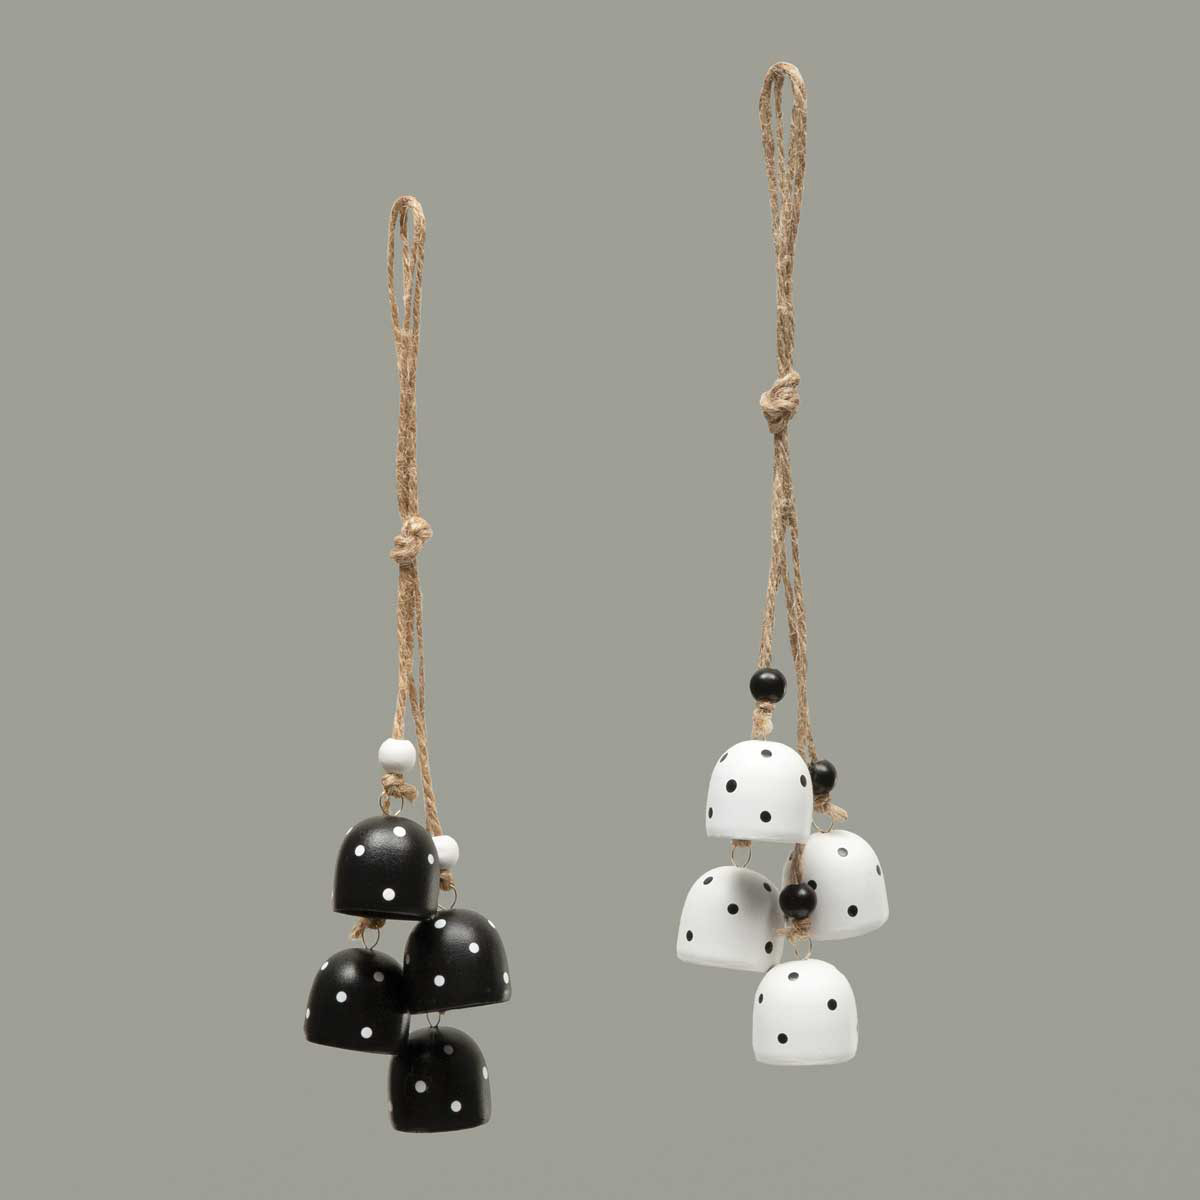 ORNAMENT HANG BELLS 2 ASSORTED 2IN X 11IN BLACK/WHITE METAL